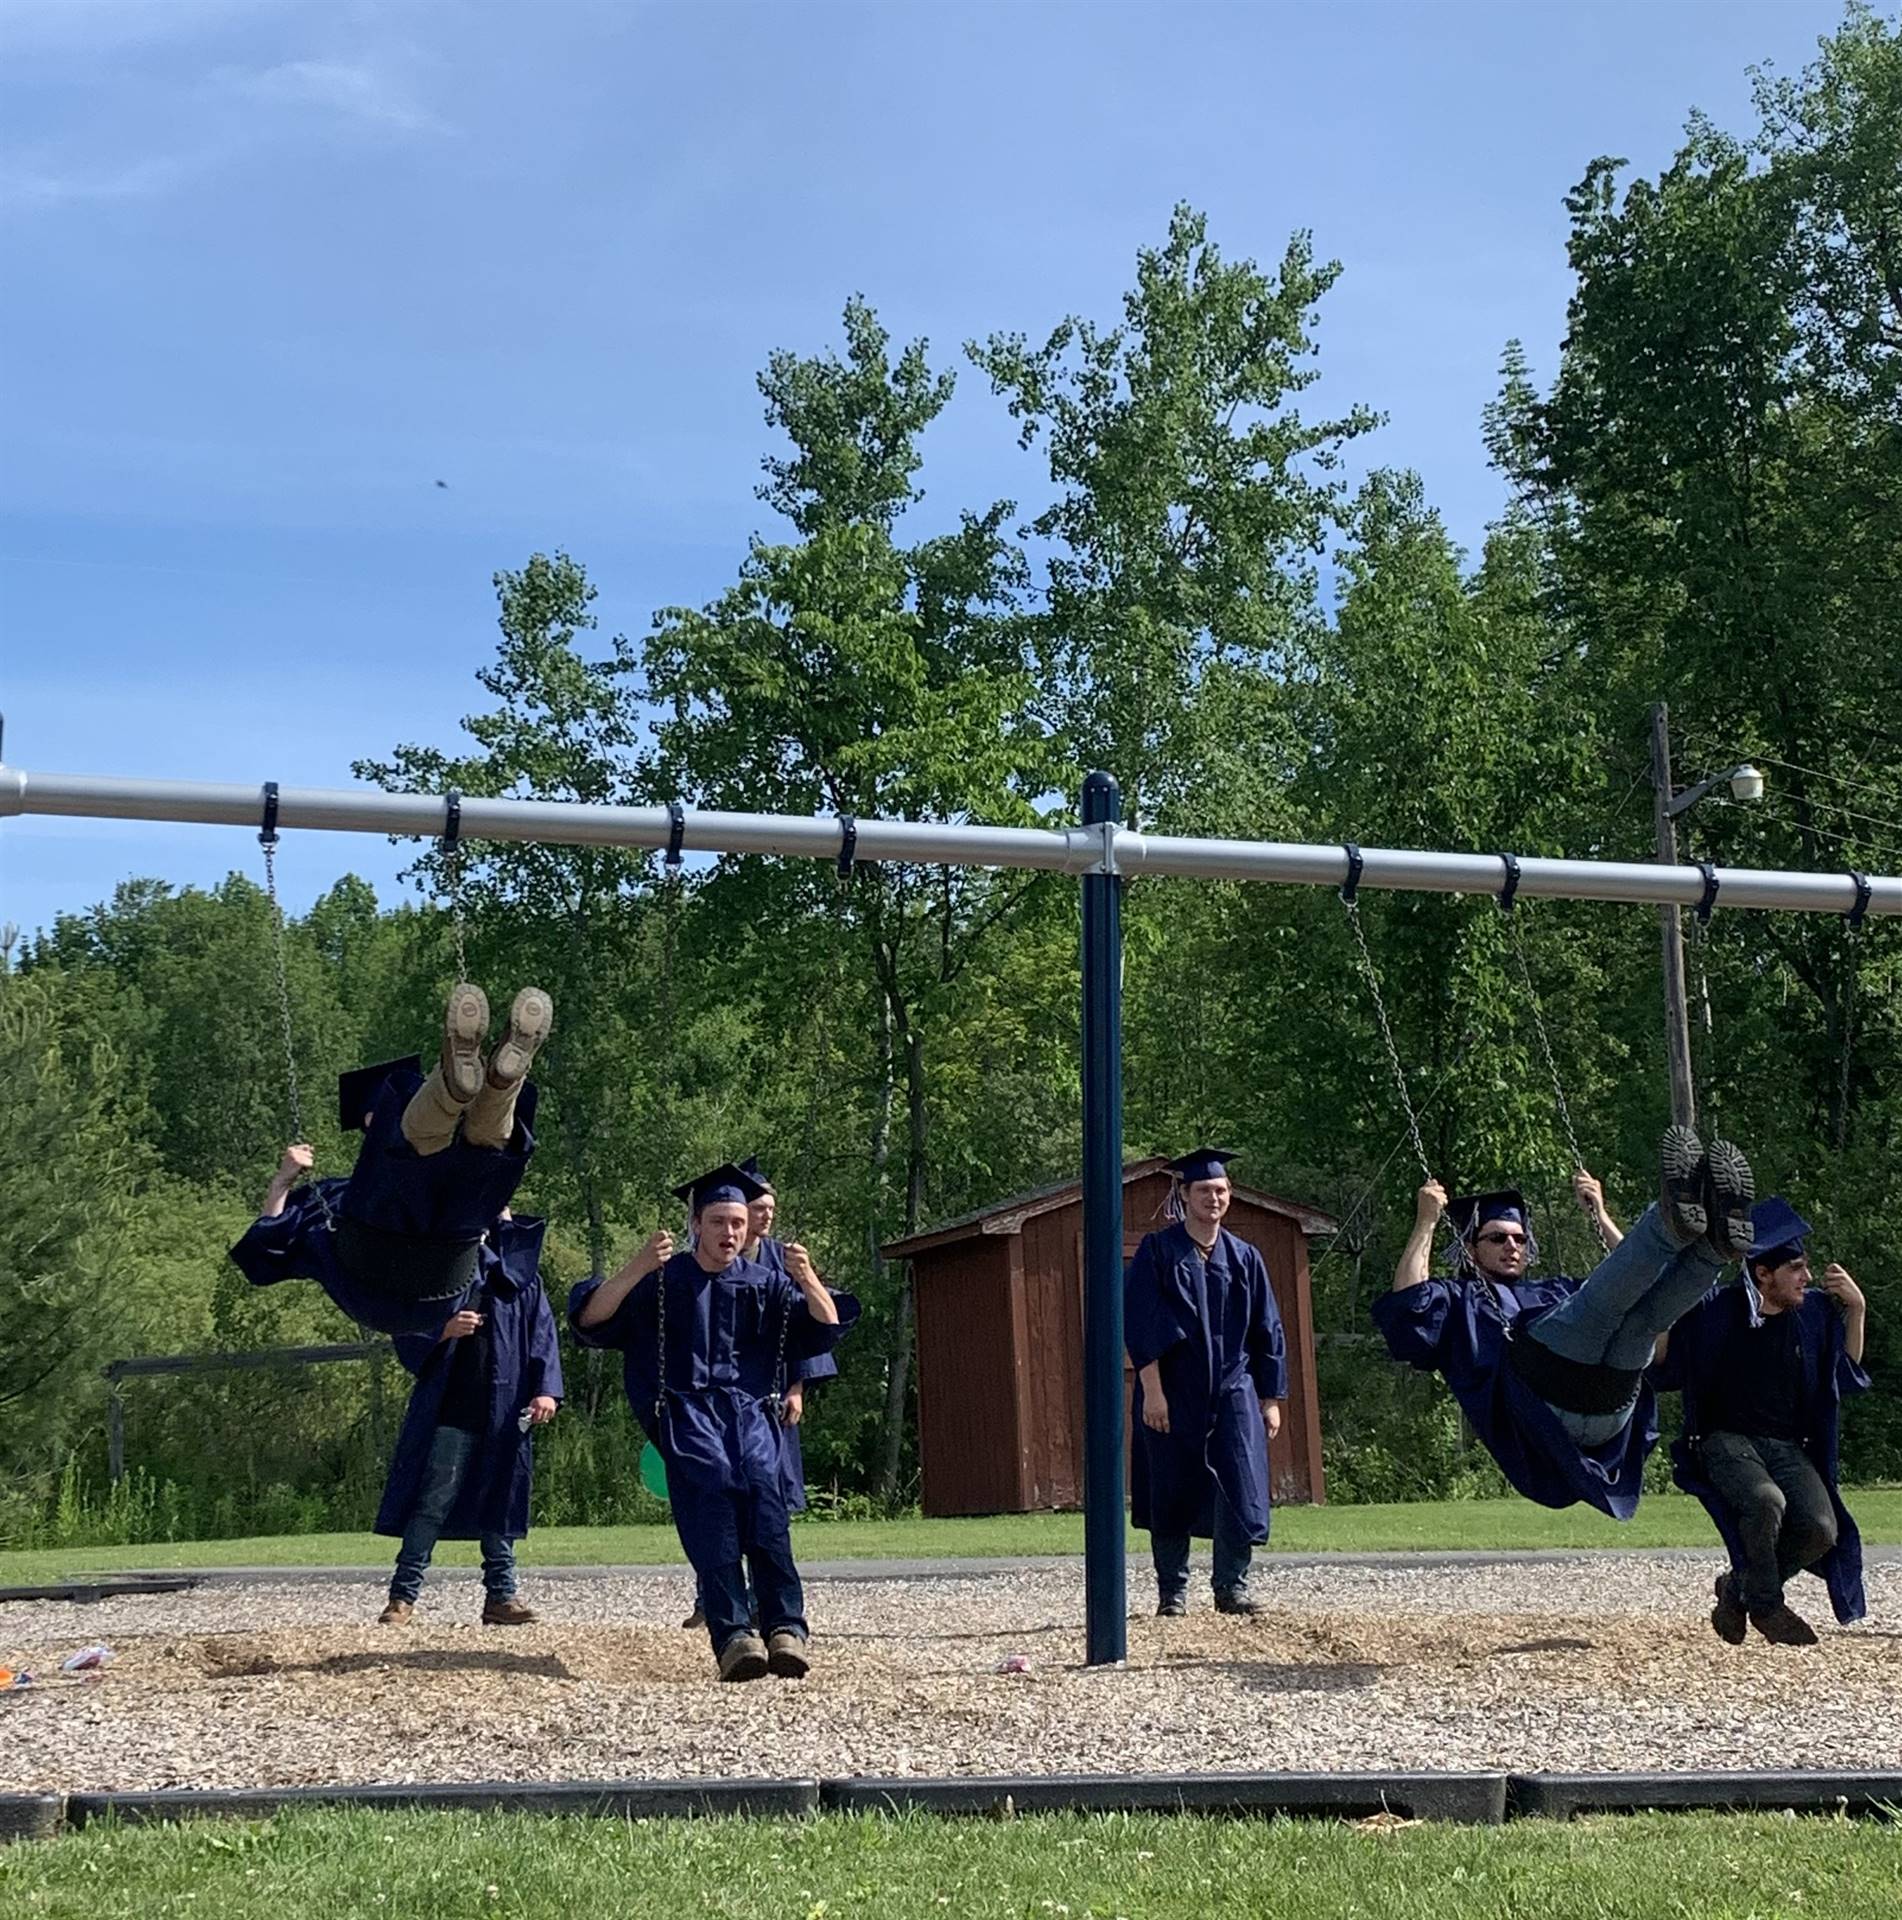 high school graduates in cap and gown swing on playground